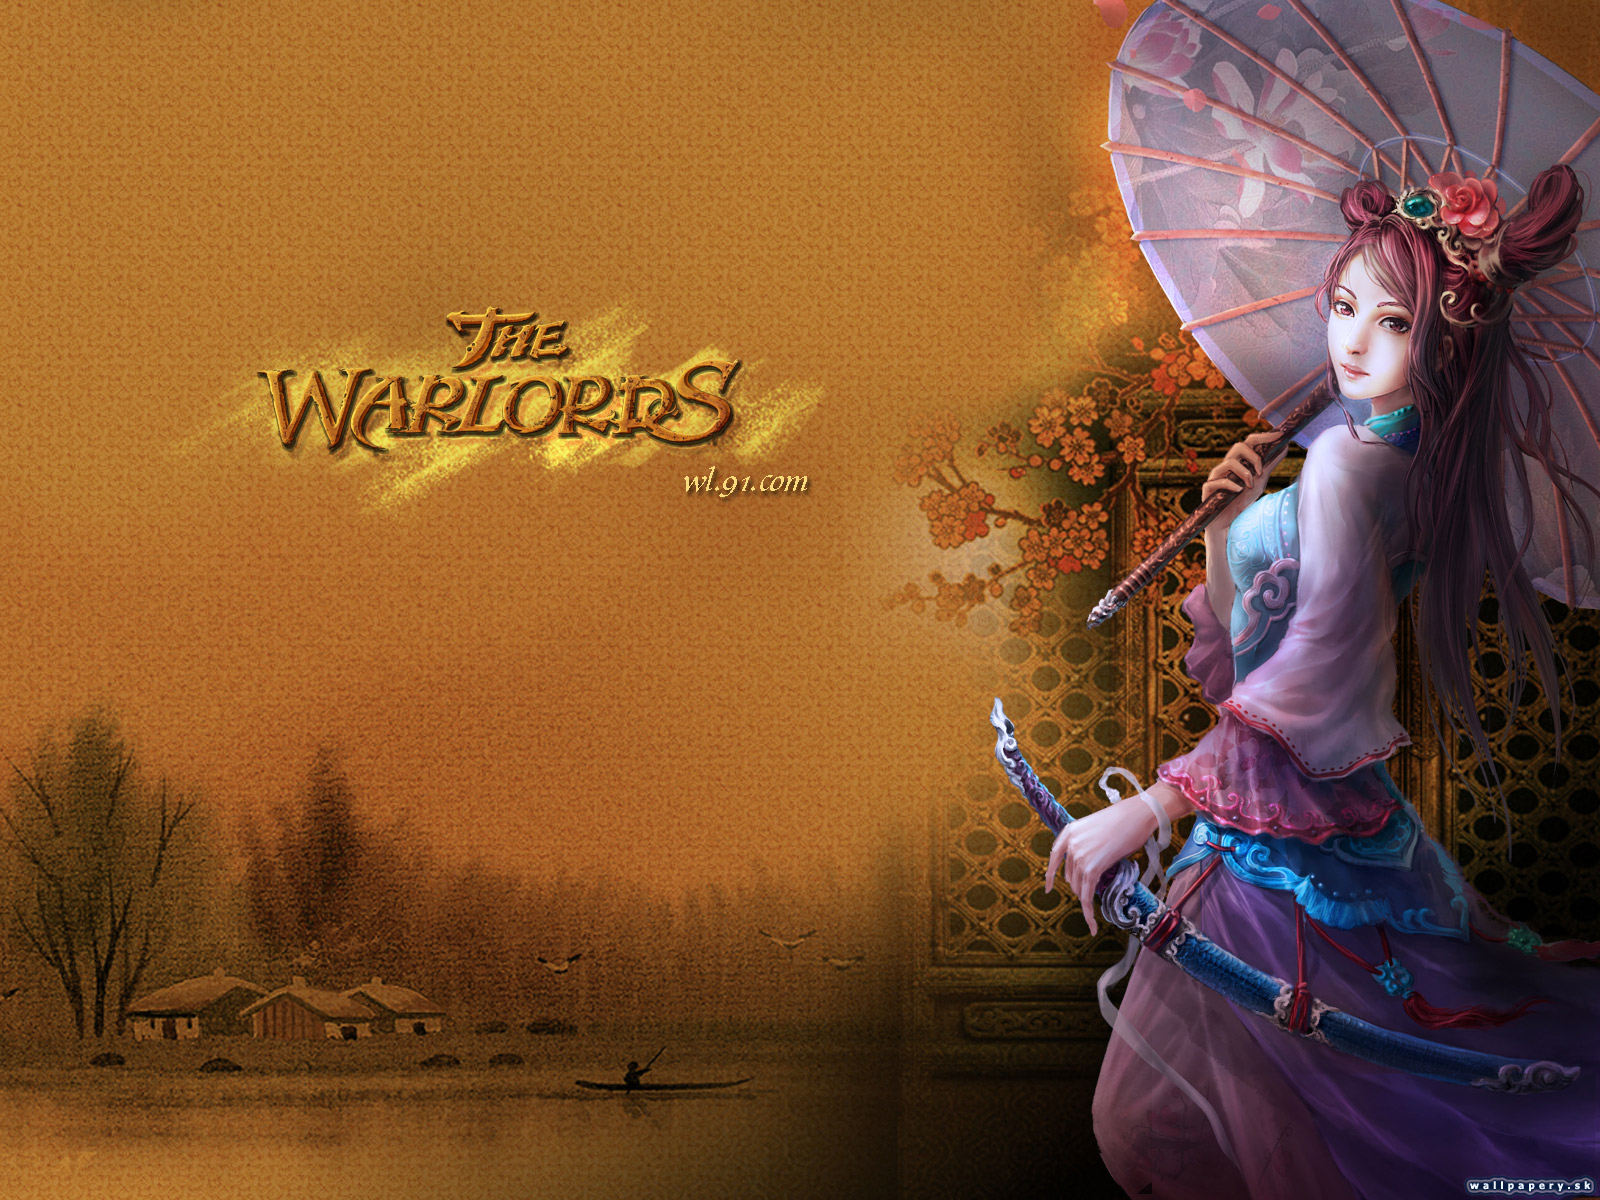 The Warlords - wallpaper 12